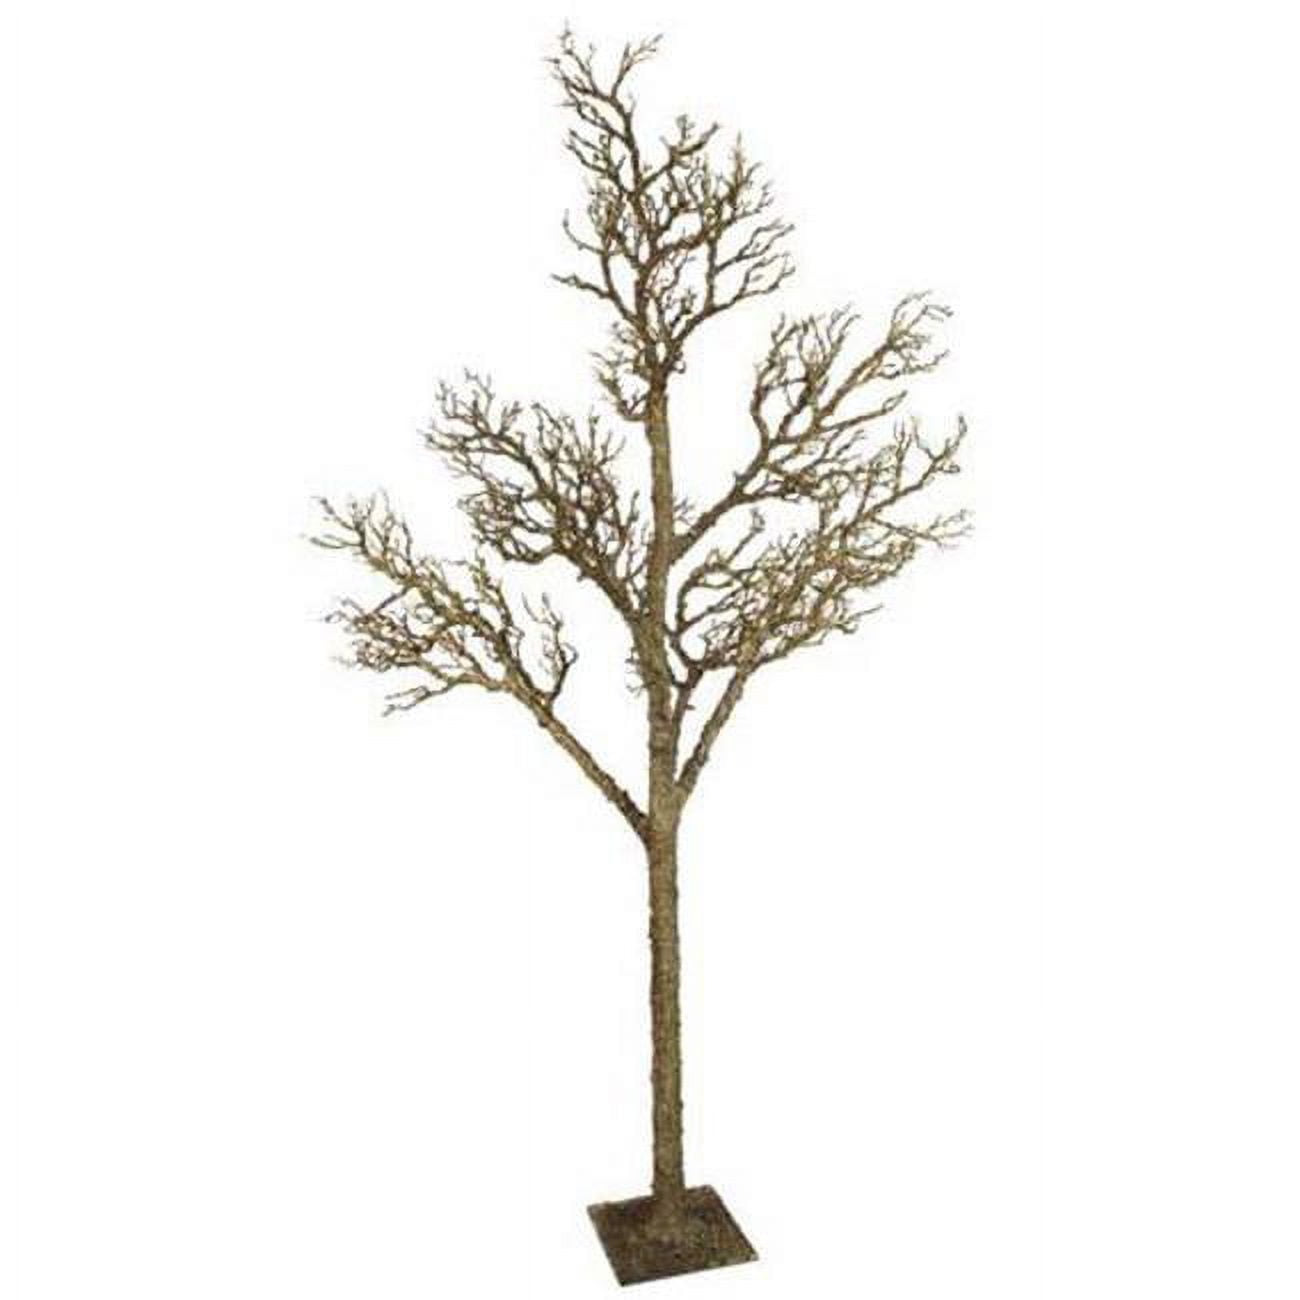 A-161385 8 Ft. Plastic Twig Tree, Brown